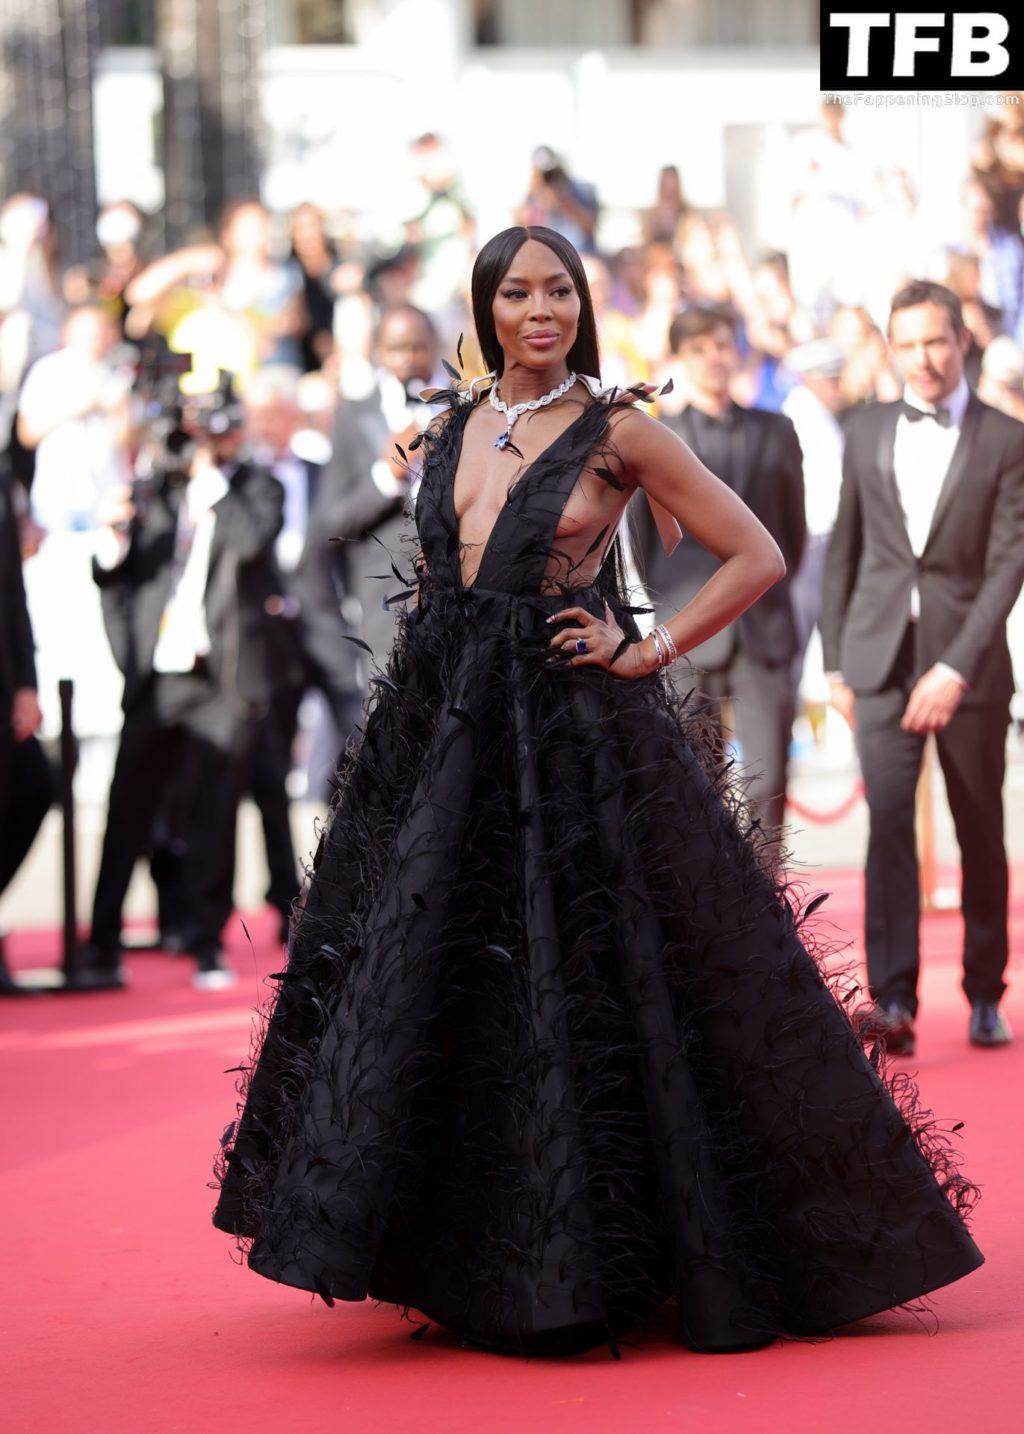 Naomi Campbell Displays Her Tits at the 75th Annual Cannes Film Festival (150 Photos)